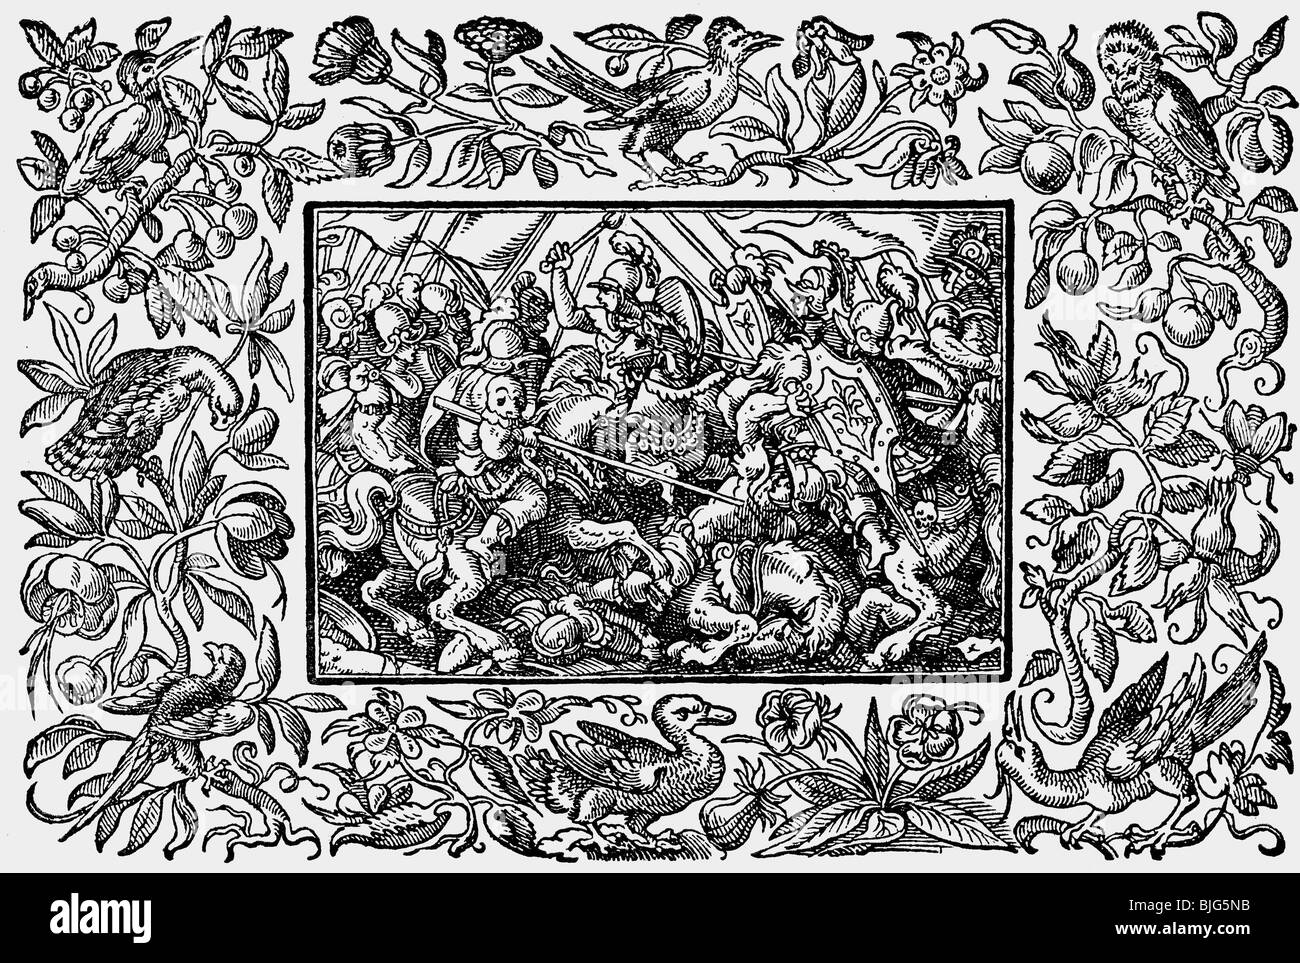 fine arts, Amman, Jost (1539-1591), woodcut, battle scene, from 'Heldenbuch', printed by Sigmund Feyerabend, Frankfurt on the Main, Germany, 1590, facsimile from 'Der Formenschatz' (Art Treasure) published by Georg Hirth, 1884, Artist's Copyright has not to be cleared Stock Photo